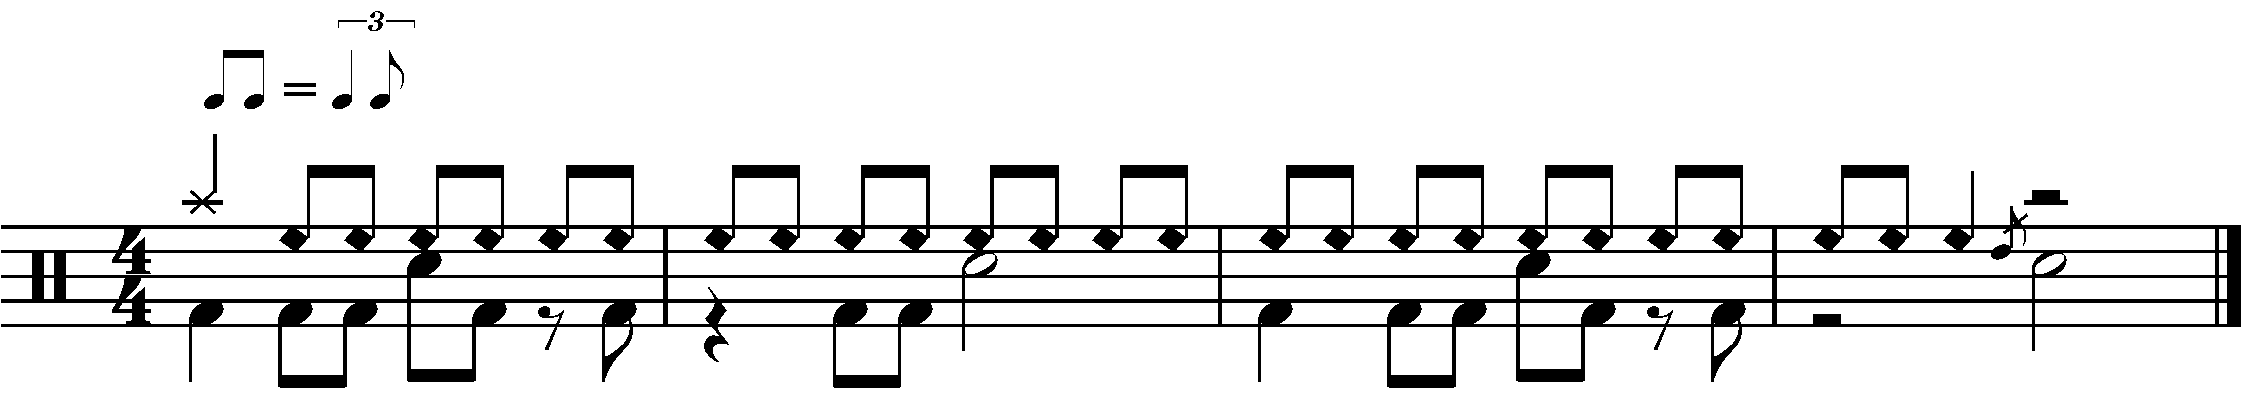 A four bar phrase made up of A B and C sections in swing time